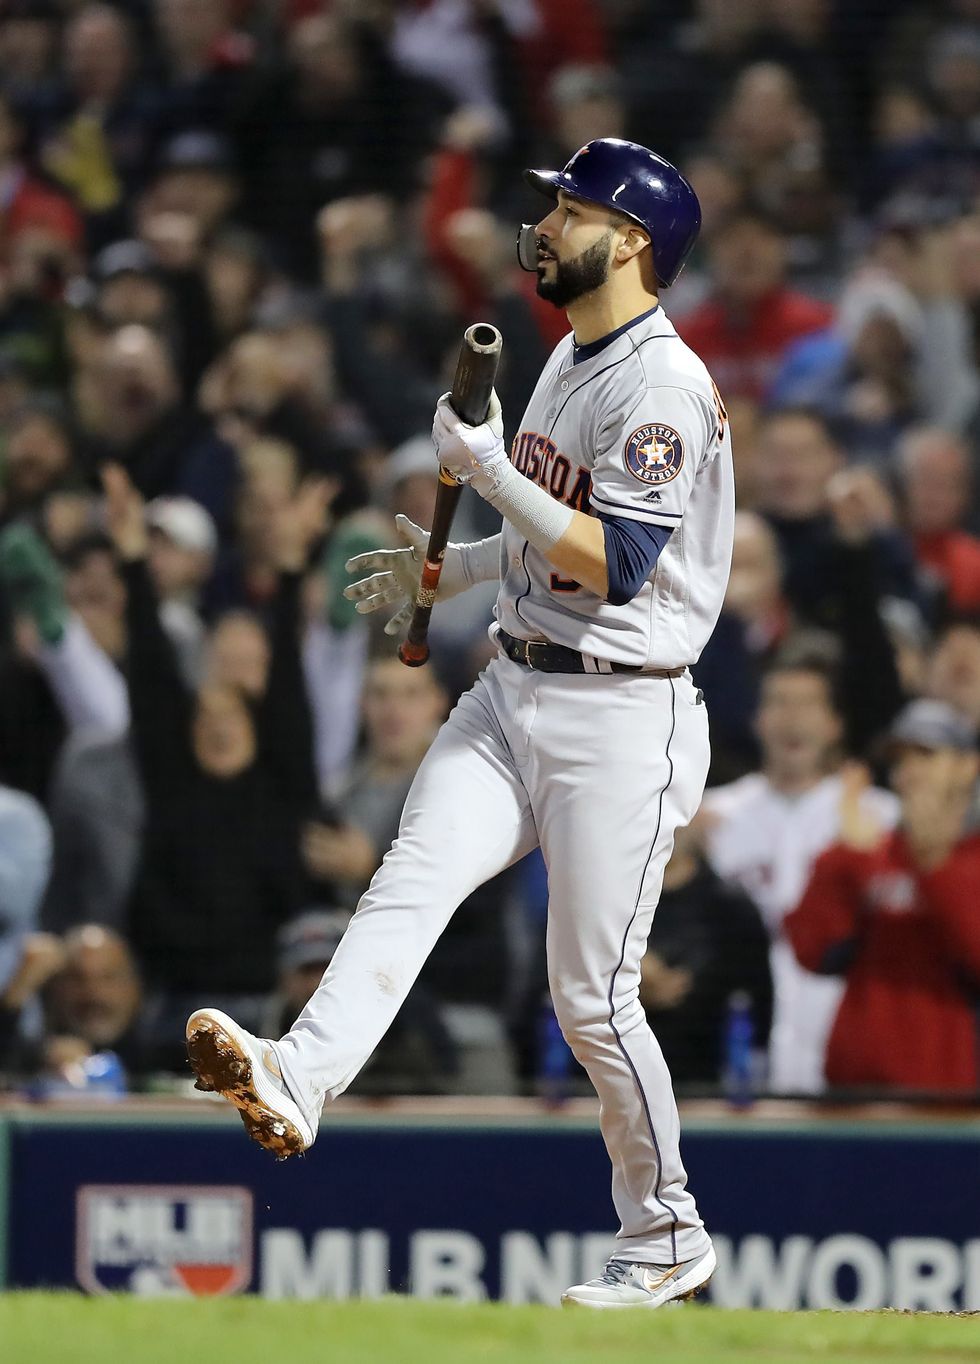 Offenses trade blows early, but Red Sox win 7-5 over Astros to tie up ALCS at 1-1